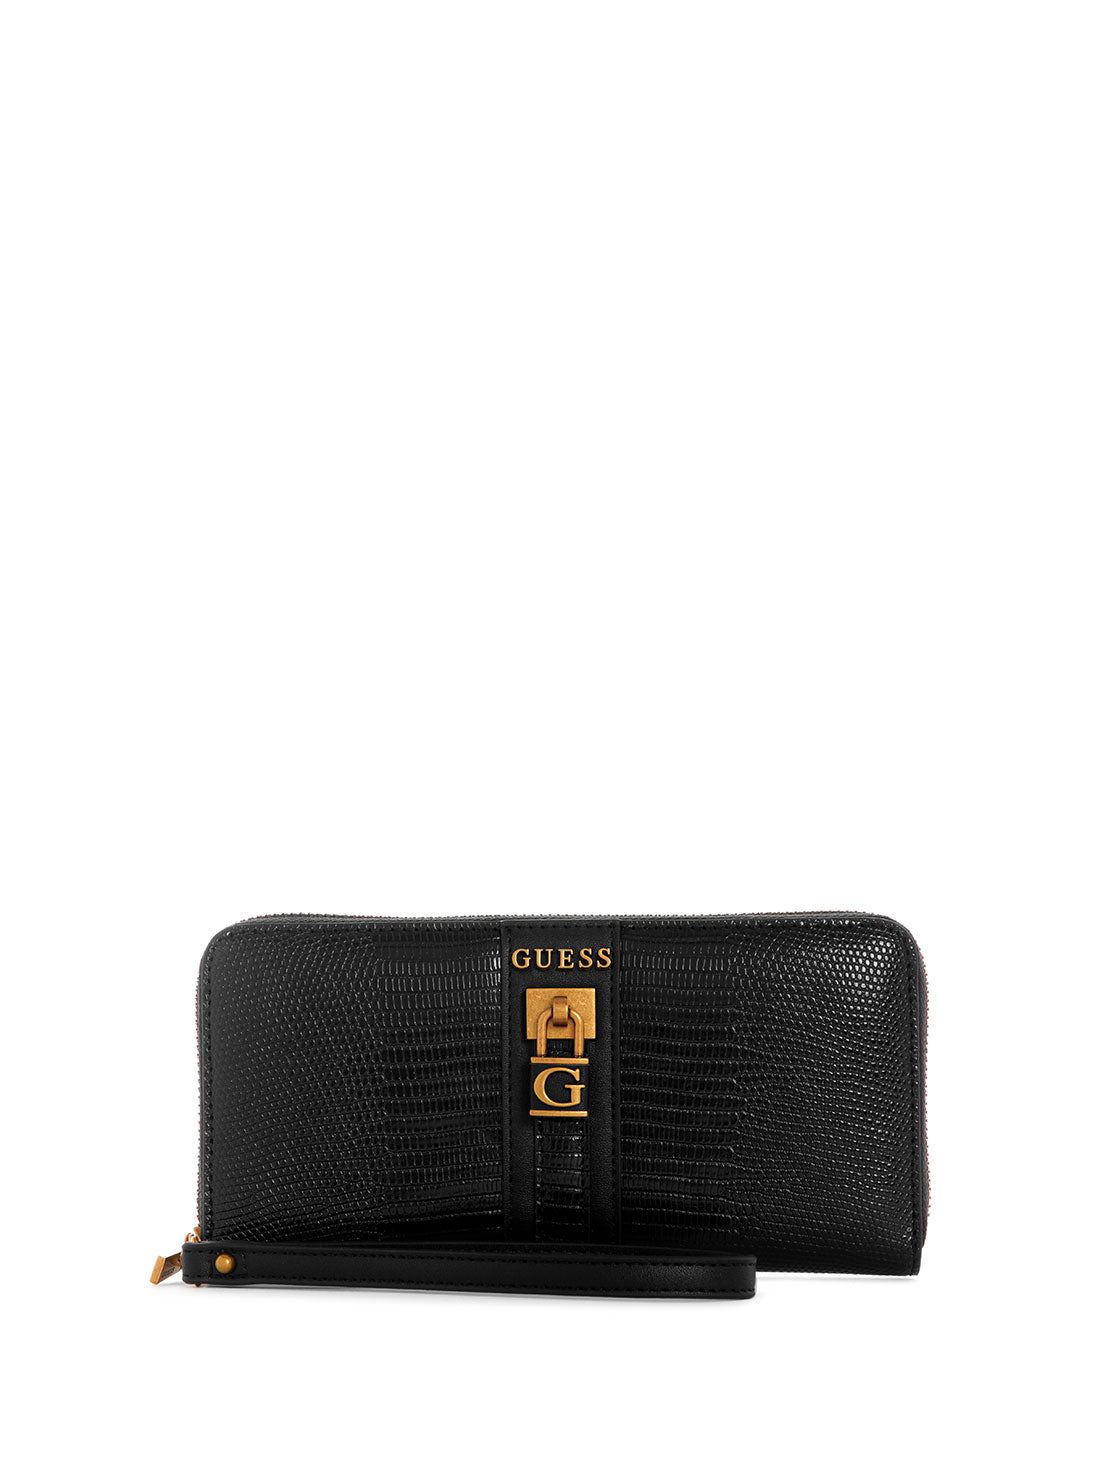 GUESS Women's Black Ginvera Large Wallet KB873446 Front View